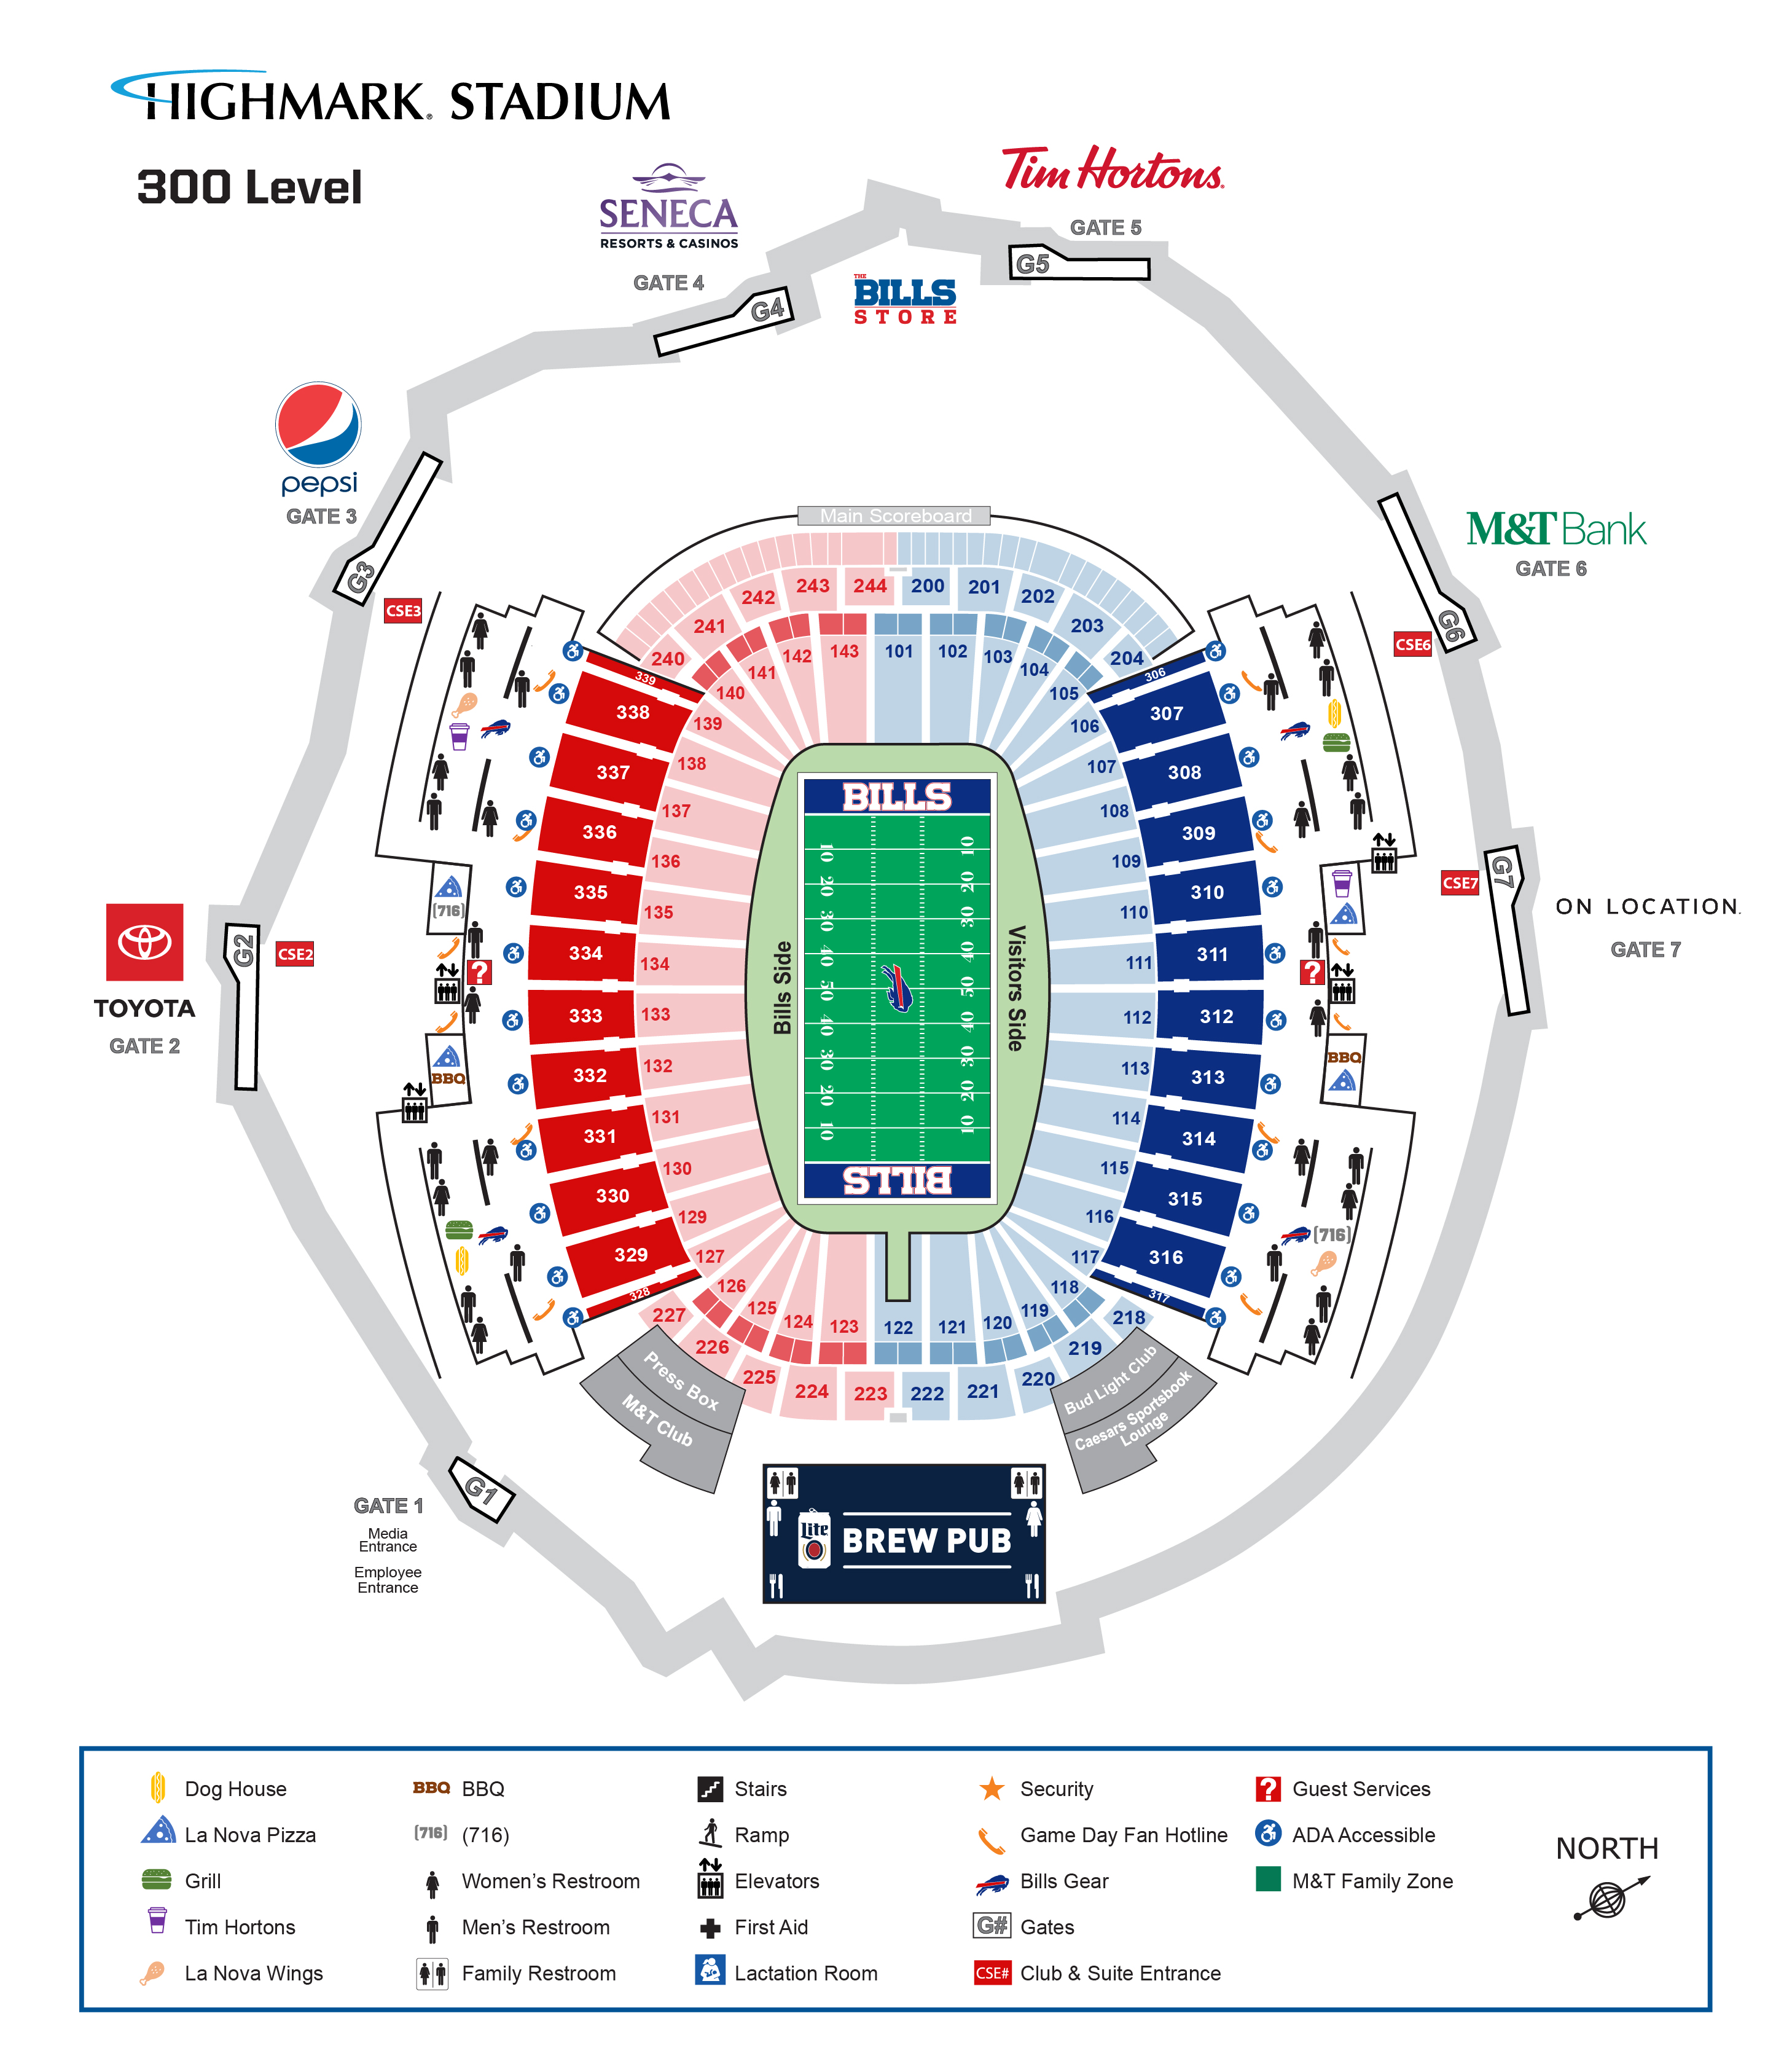 Tennessee Titans, Virtual Venue™, Powered by IOMEDIA